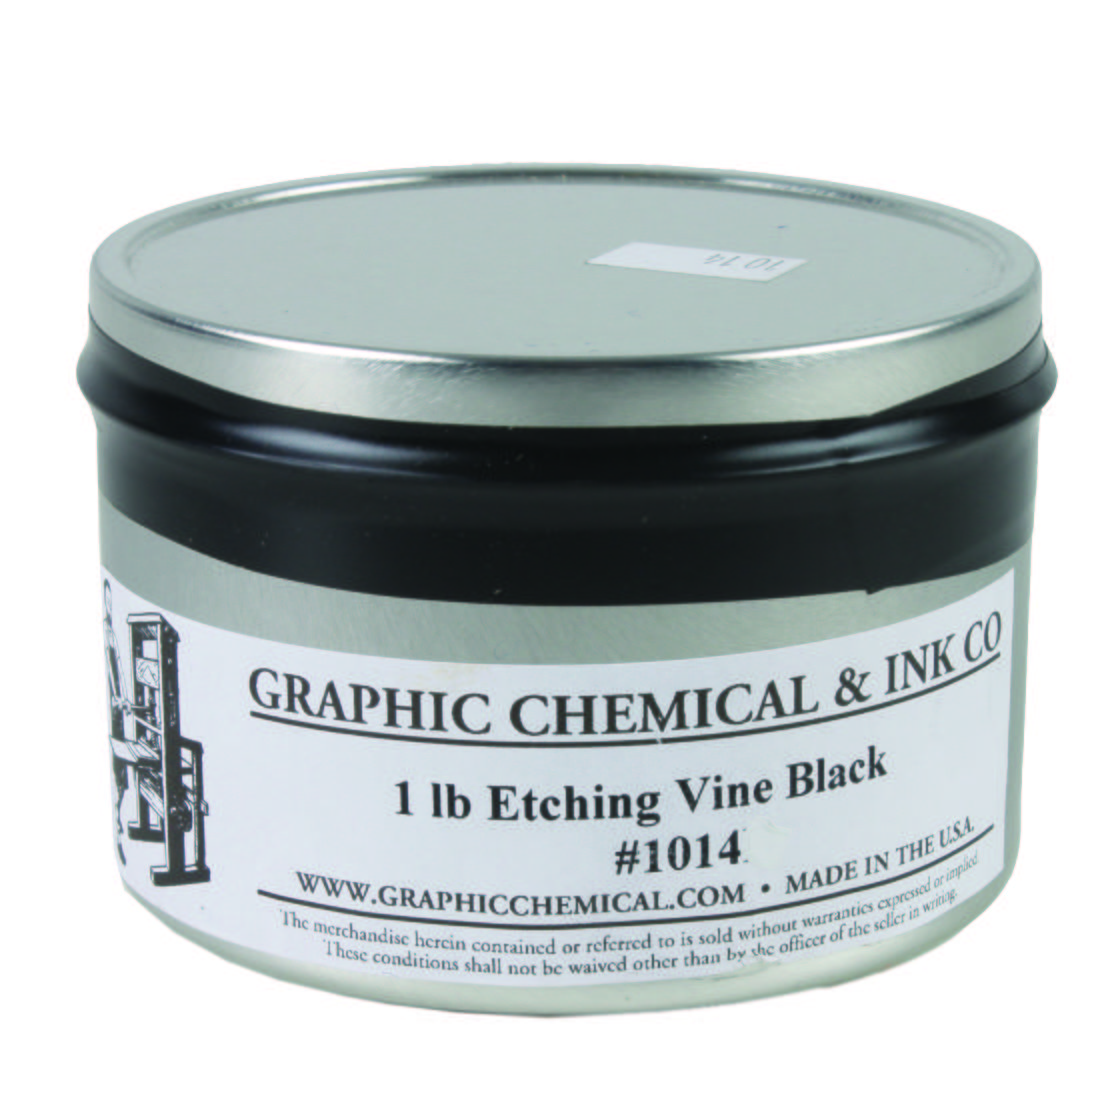 Graphic Chemical Etching Ink Vine Black